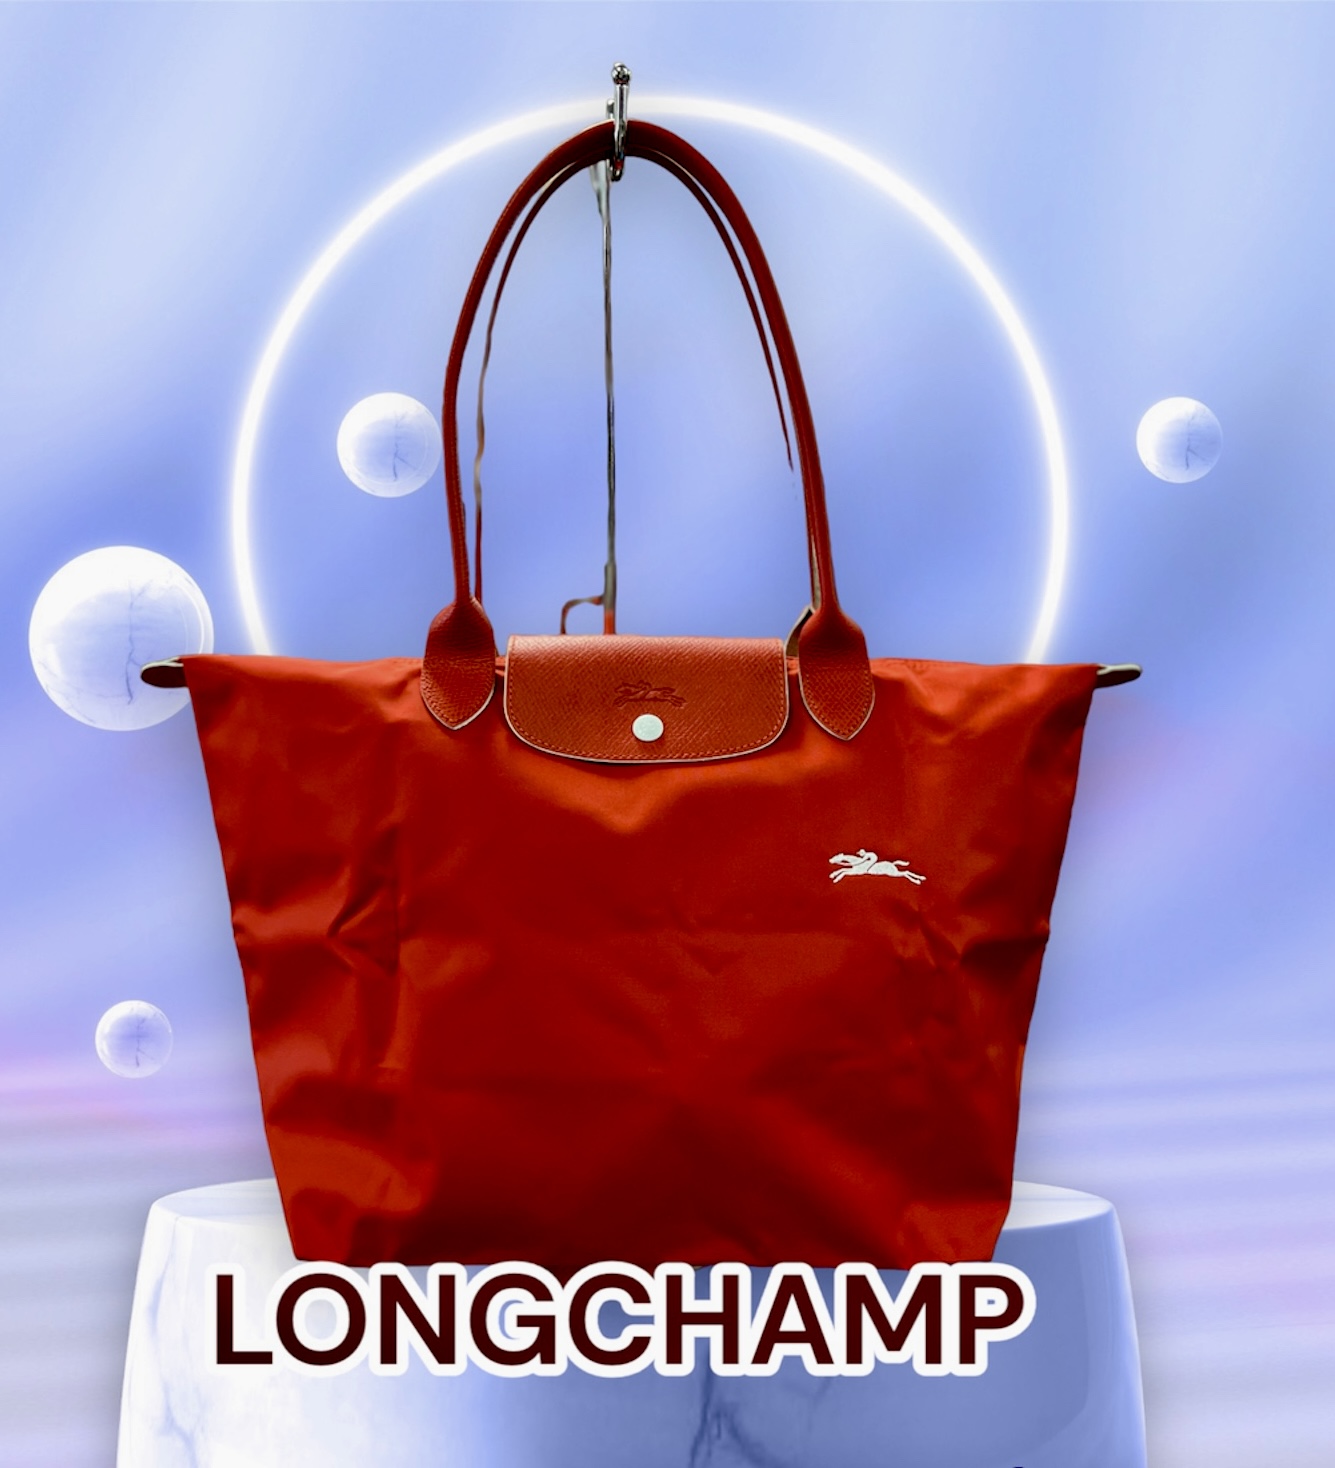 LONGCHAMP
Le Pliage Tote
Original Retail: $155.00

Smooth, sleek red nylon and embossed leather trim make this spacious tote a no-brainer for everyday versatility and elegance.
This bag is preowned, in like new conditions.  Does not appear to ever of been used.  Spotless interior and exterior.
Water-resistant lining
Textile with leather trim
12 1/4”W x 11 3/4”H x 7 1/2”D.
9\" Strap Drop
*******In 1948, Jean Cassegrain turned his Paris tobacco shop—where he was known to cover his pipes in an exquisite leather—into an accessories business. Named after the famed horse track on the outskirts of Paris, Longchamp is still family owned and operated, creating superbly crafted handbags and luggage lauded for a decidedly understated, always chic look.